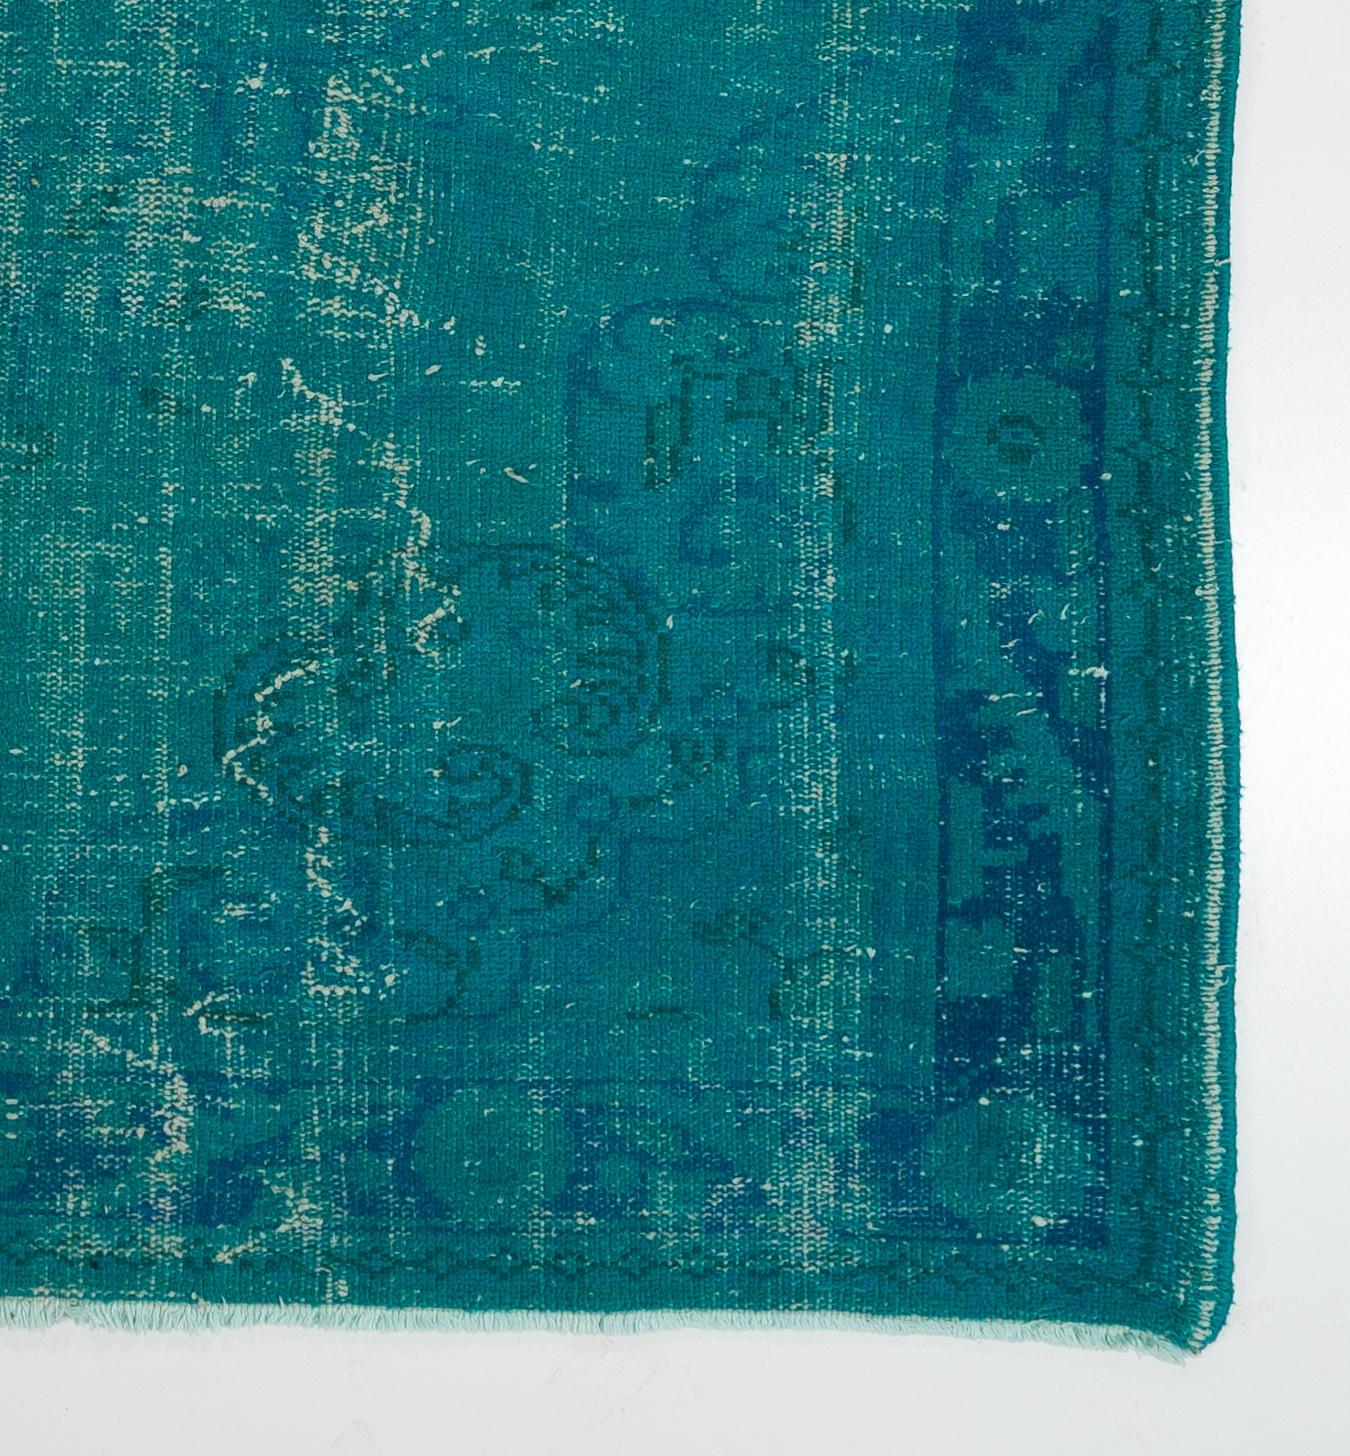 Wool 6.2x10.4 Ft Vintage Handmade Turkish Rug Over-dyed in Teal for Modern Interiors